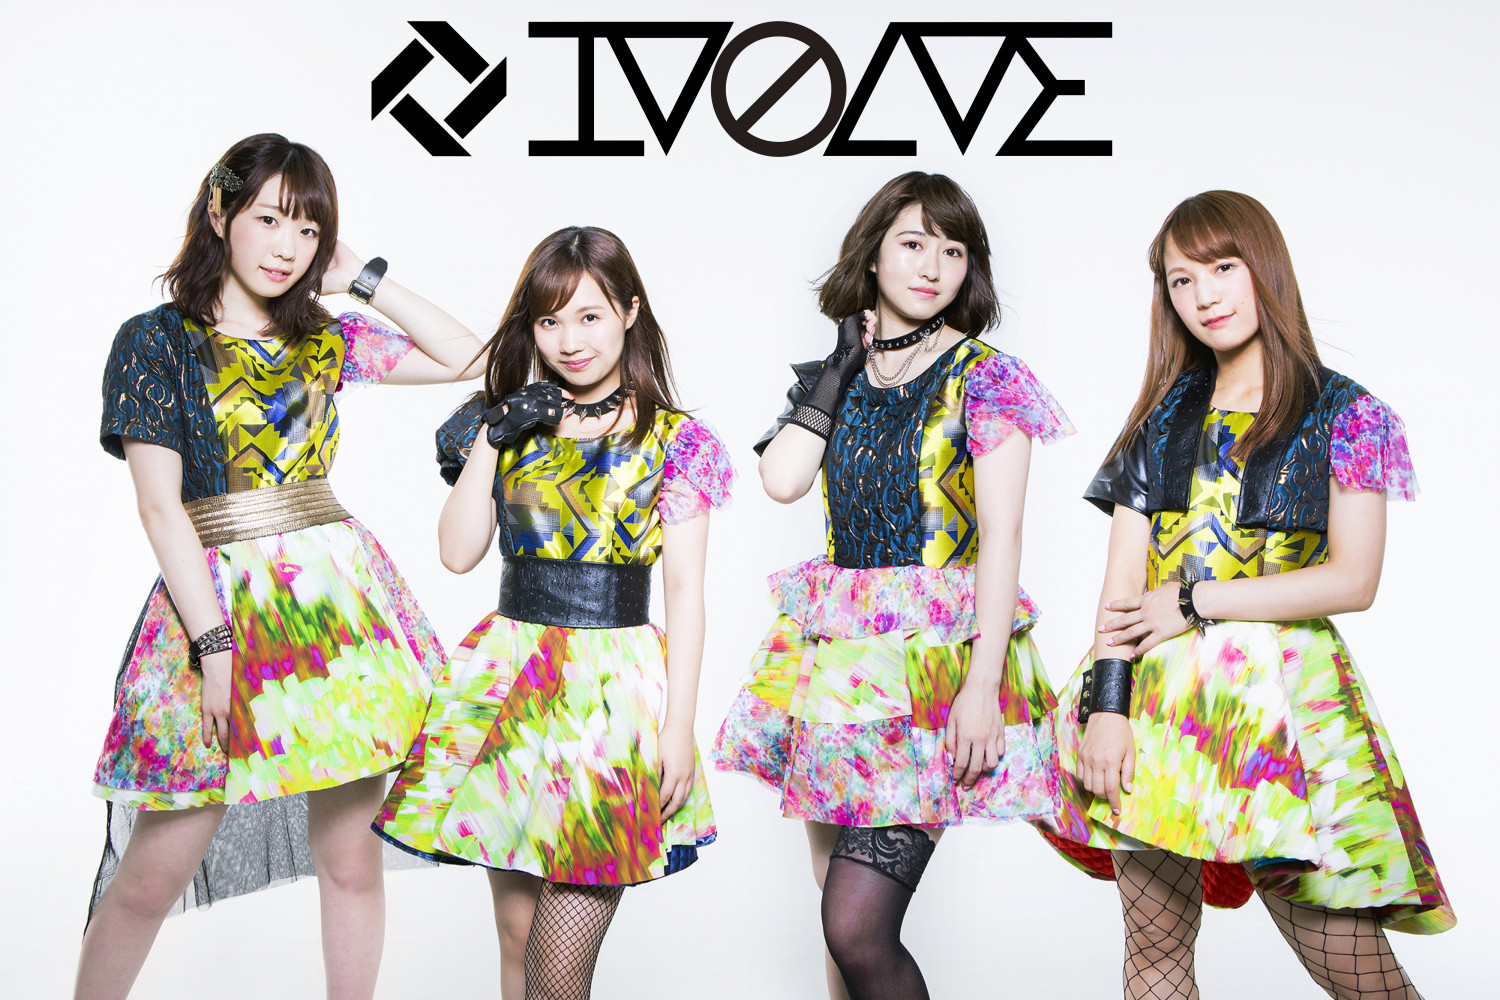 “IDOL” + “REVOLVE” = IVOLVE is about to Make Their Debut Soon!